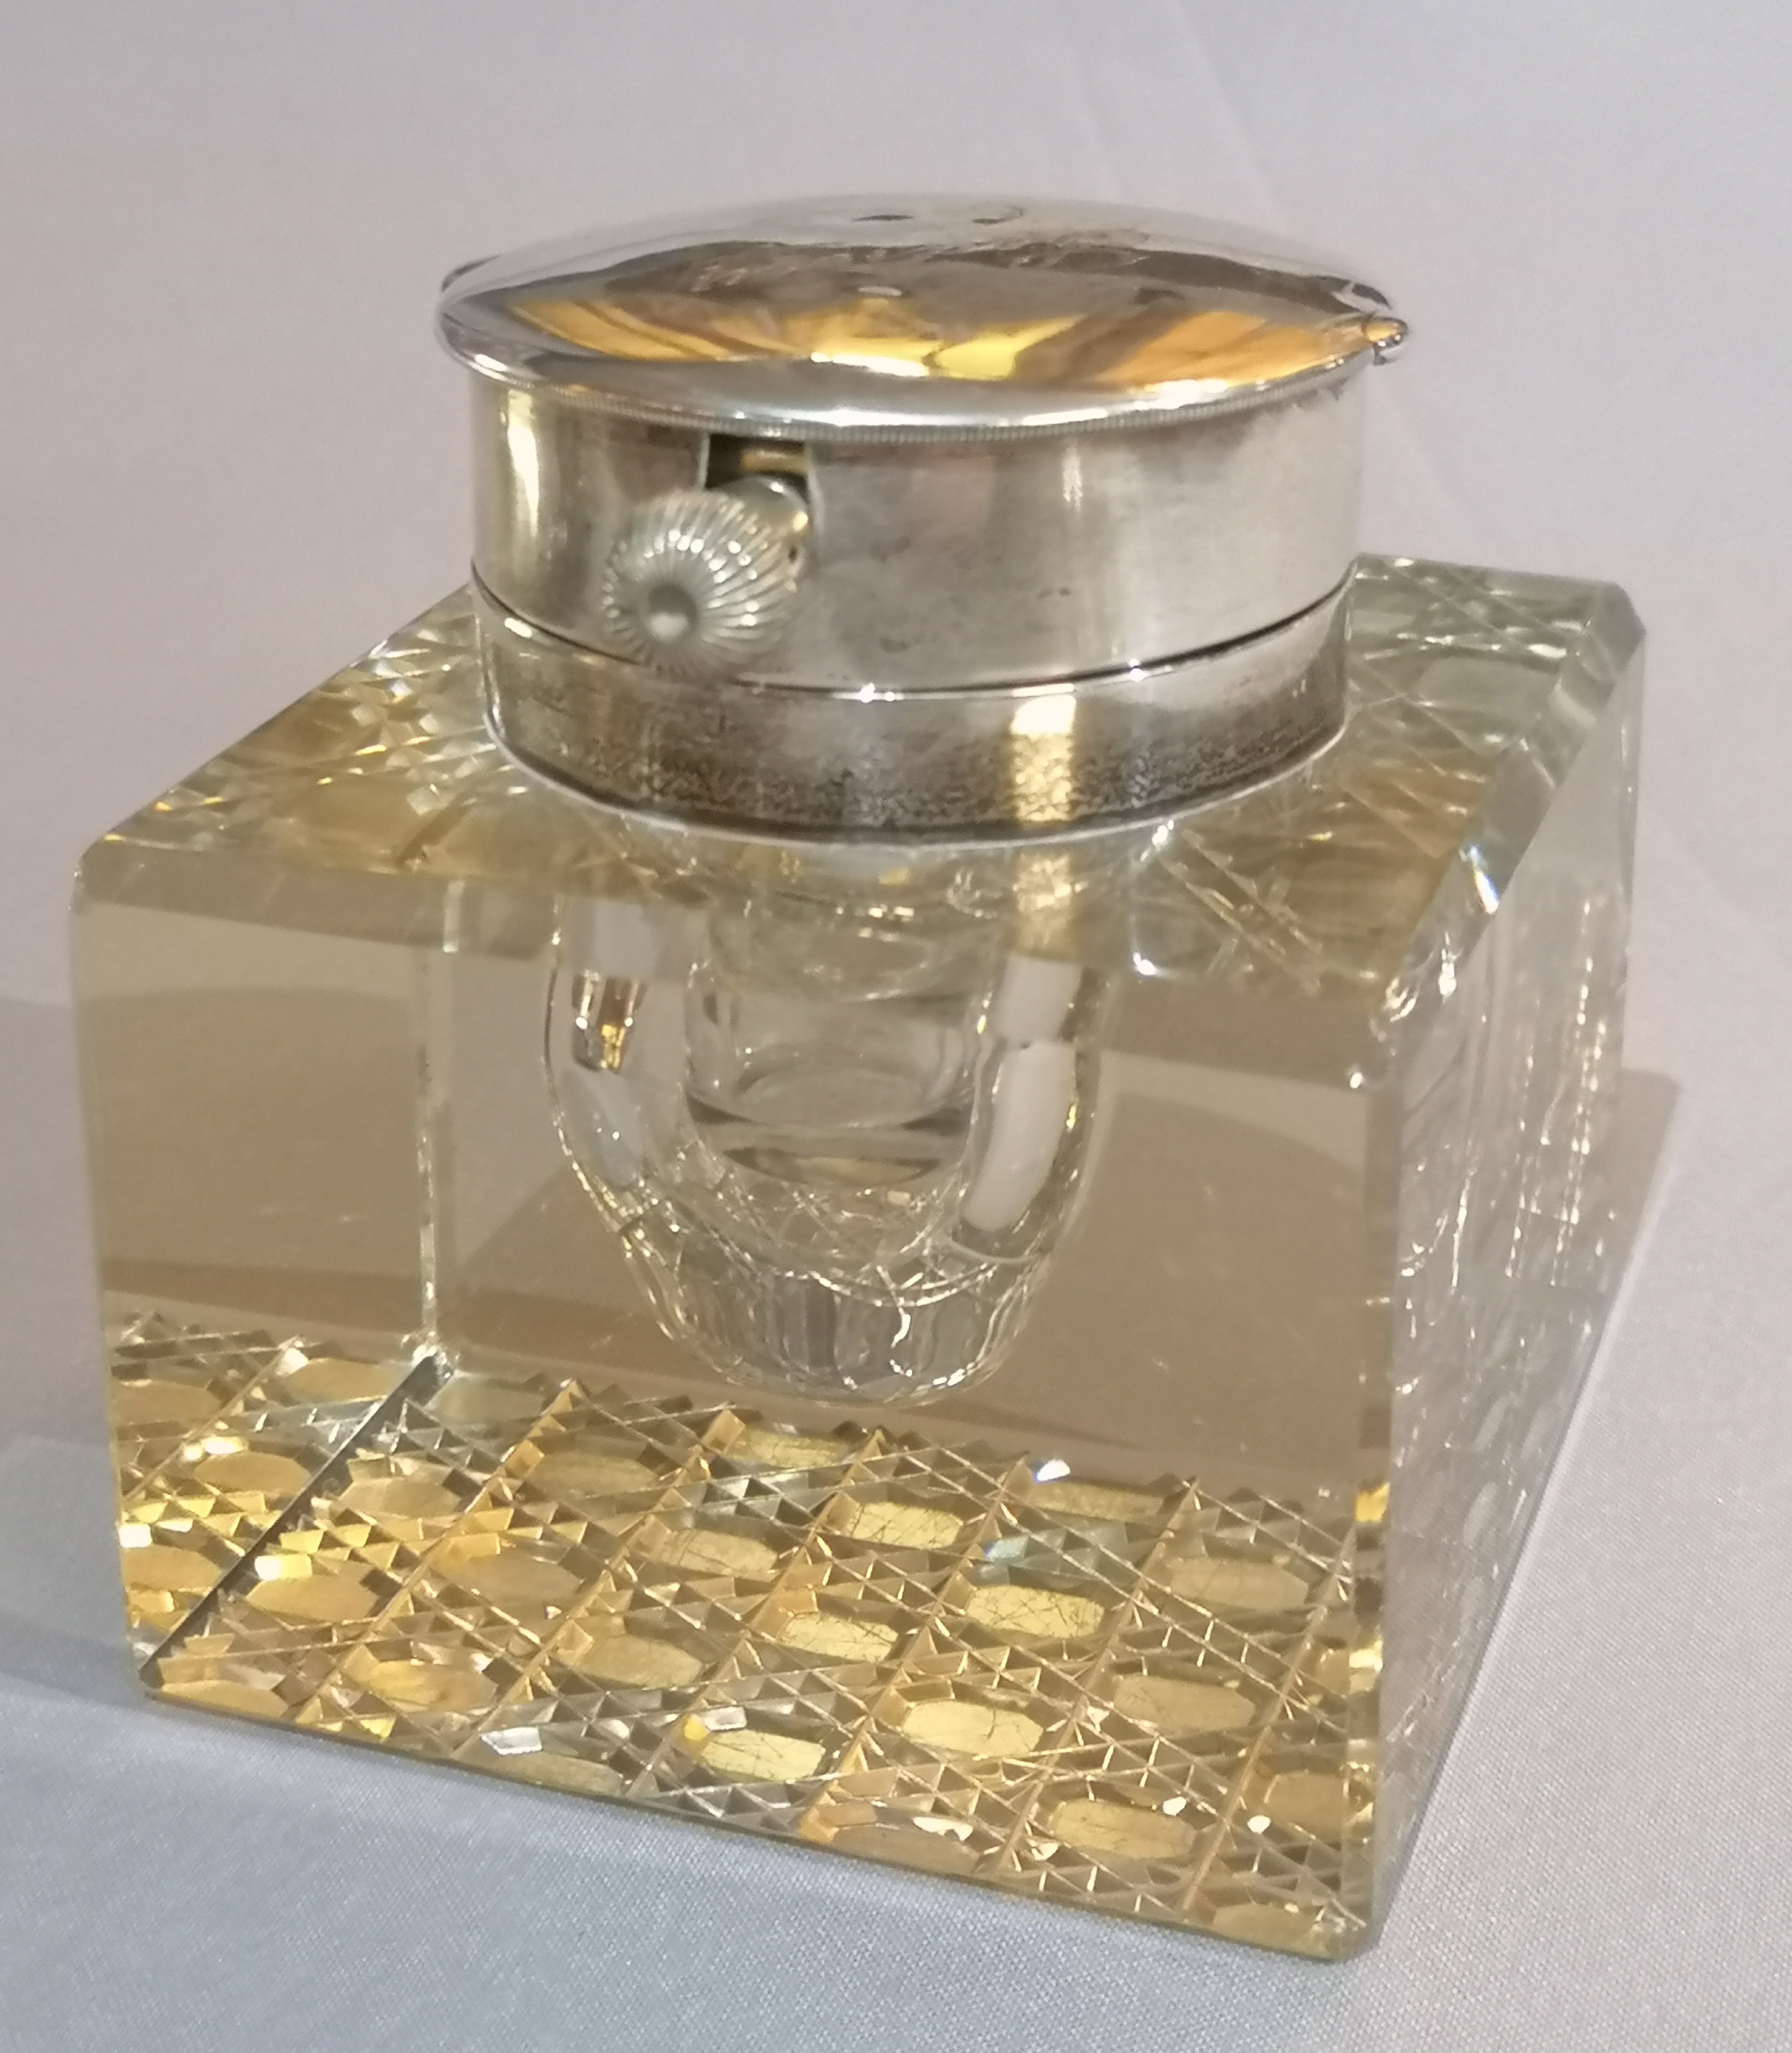 A RARE AND UNUSUAL EDWARDIAN SILVER AND CUT GLASS INKWELL/DESK CLOCK The hinged lid containing an